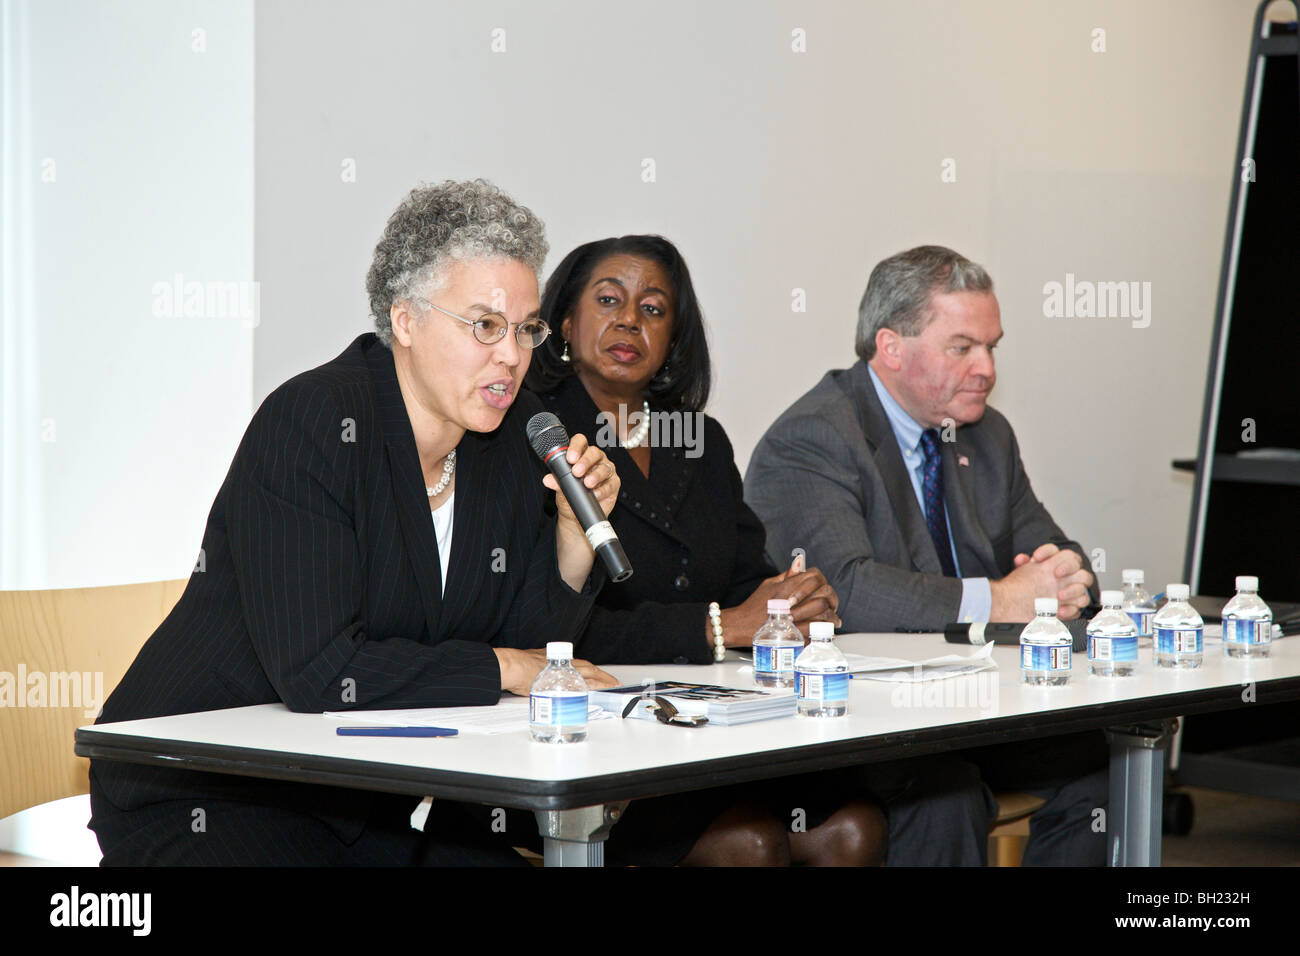 Alderman Toni Preckwinkle (speaking) with Dorothy Brown and Terrence O'Brien. Stock Photo